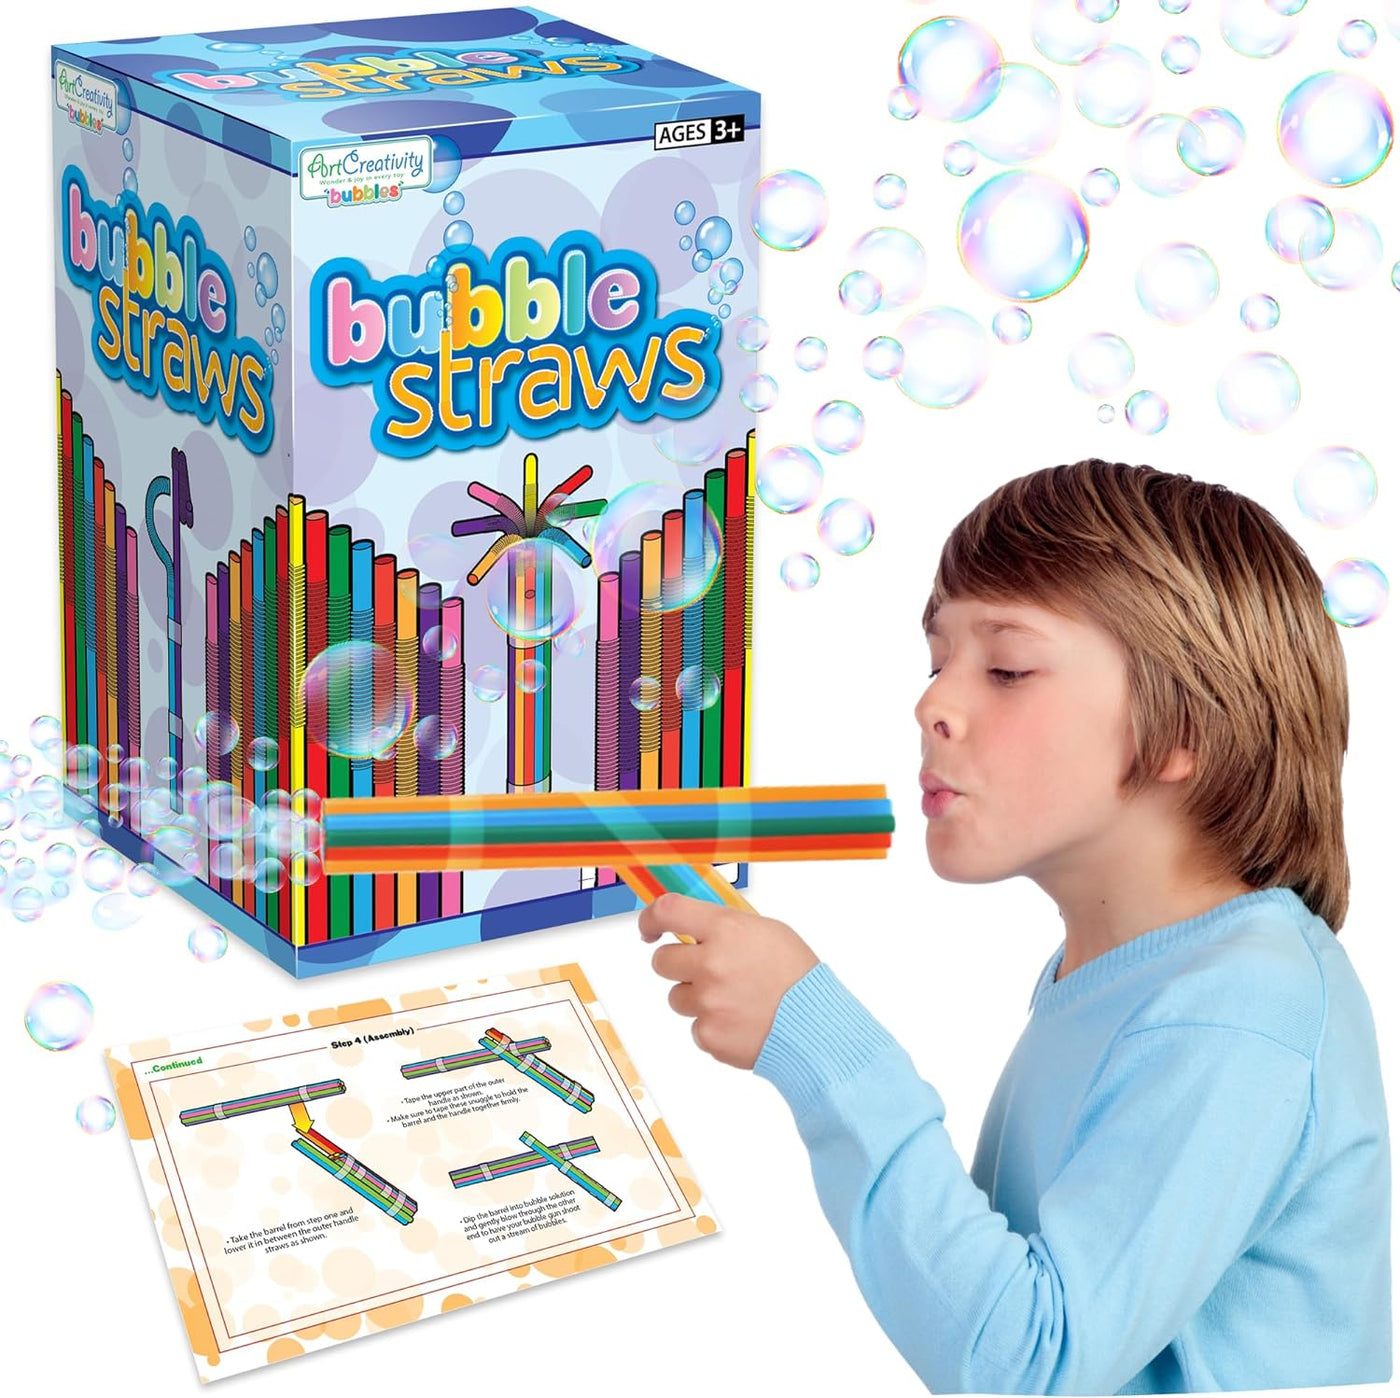 DIY Bubble Wand Craft for Kids - Set of 300 Straws, Bubble Solution and How-to Guide - Ages 4-10